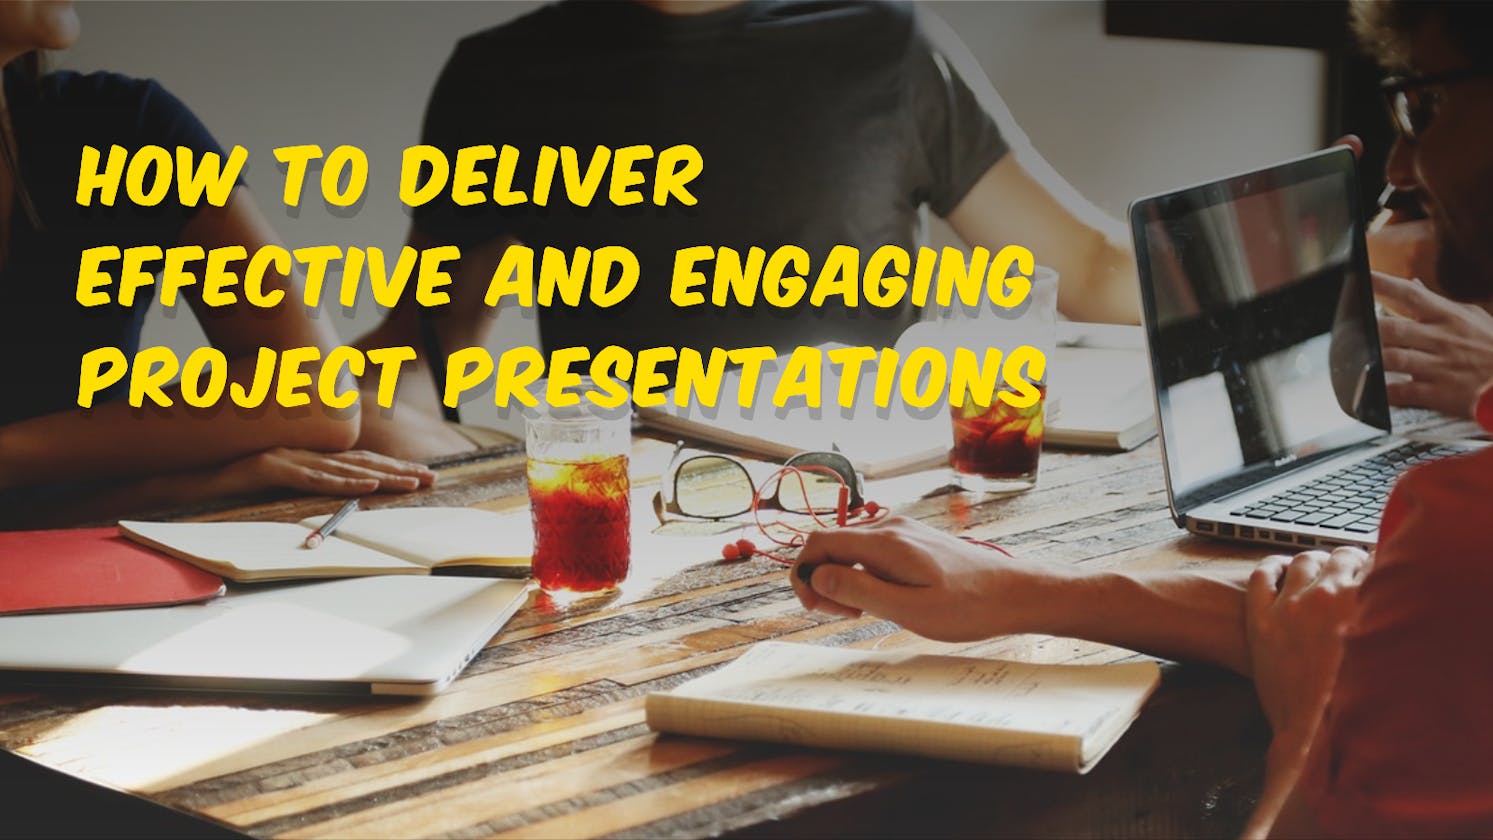 How to Deliver Effective and Engaging Project Presentations